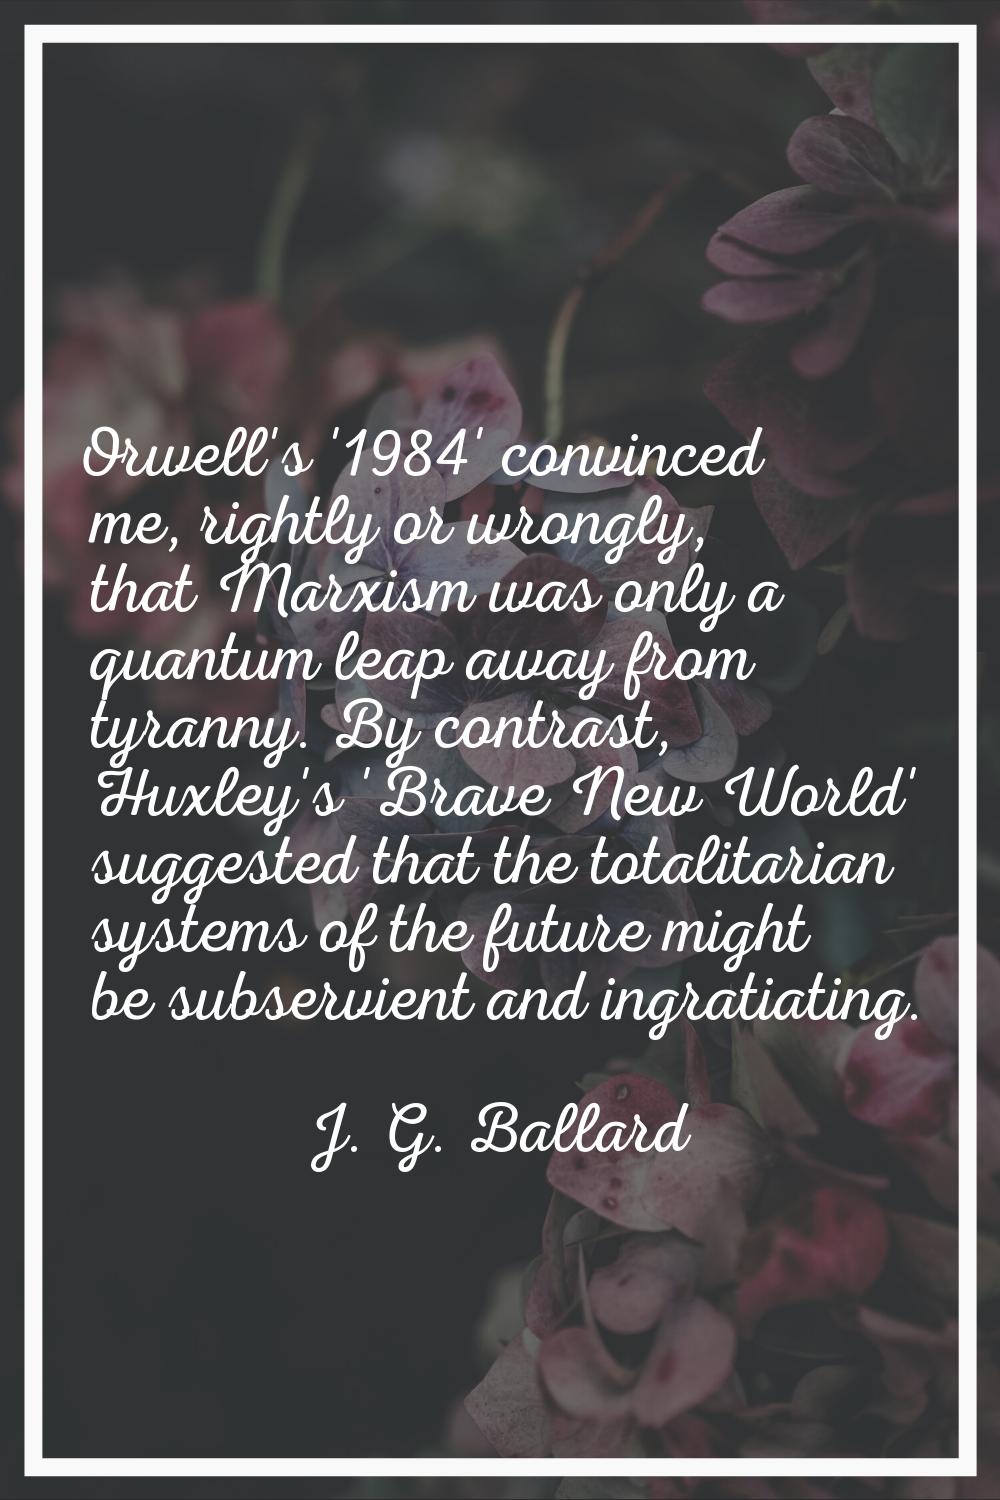 Orwell's '1984' convinced me, rightly or wrongly, that Marxism was only a quantum leap away from ty